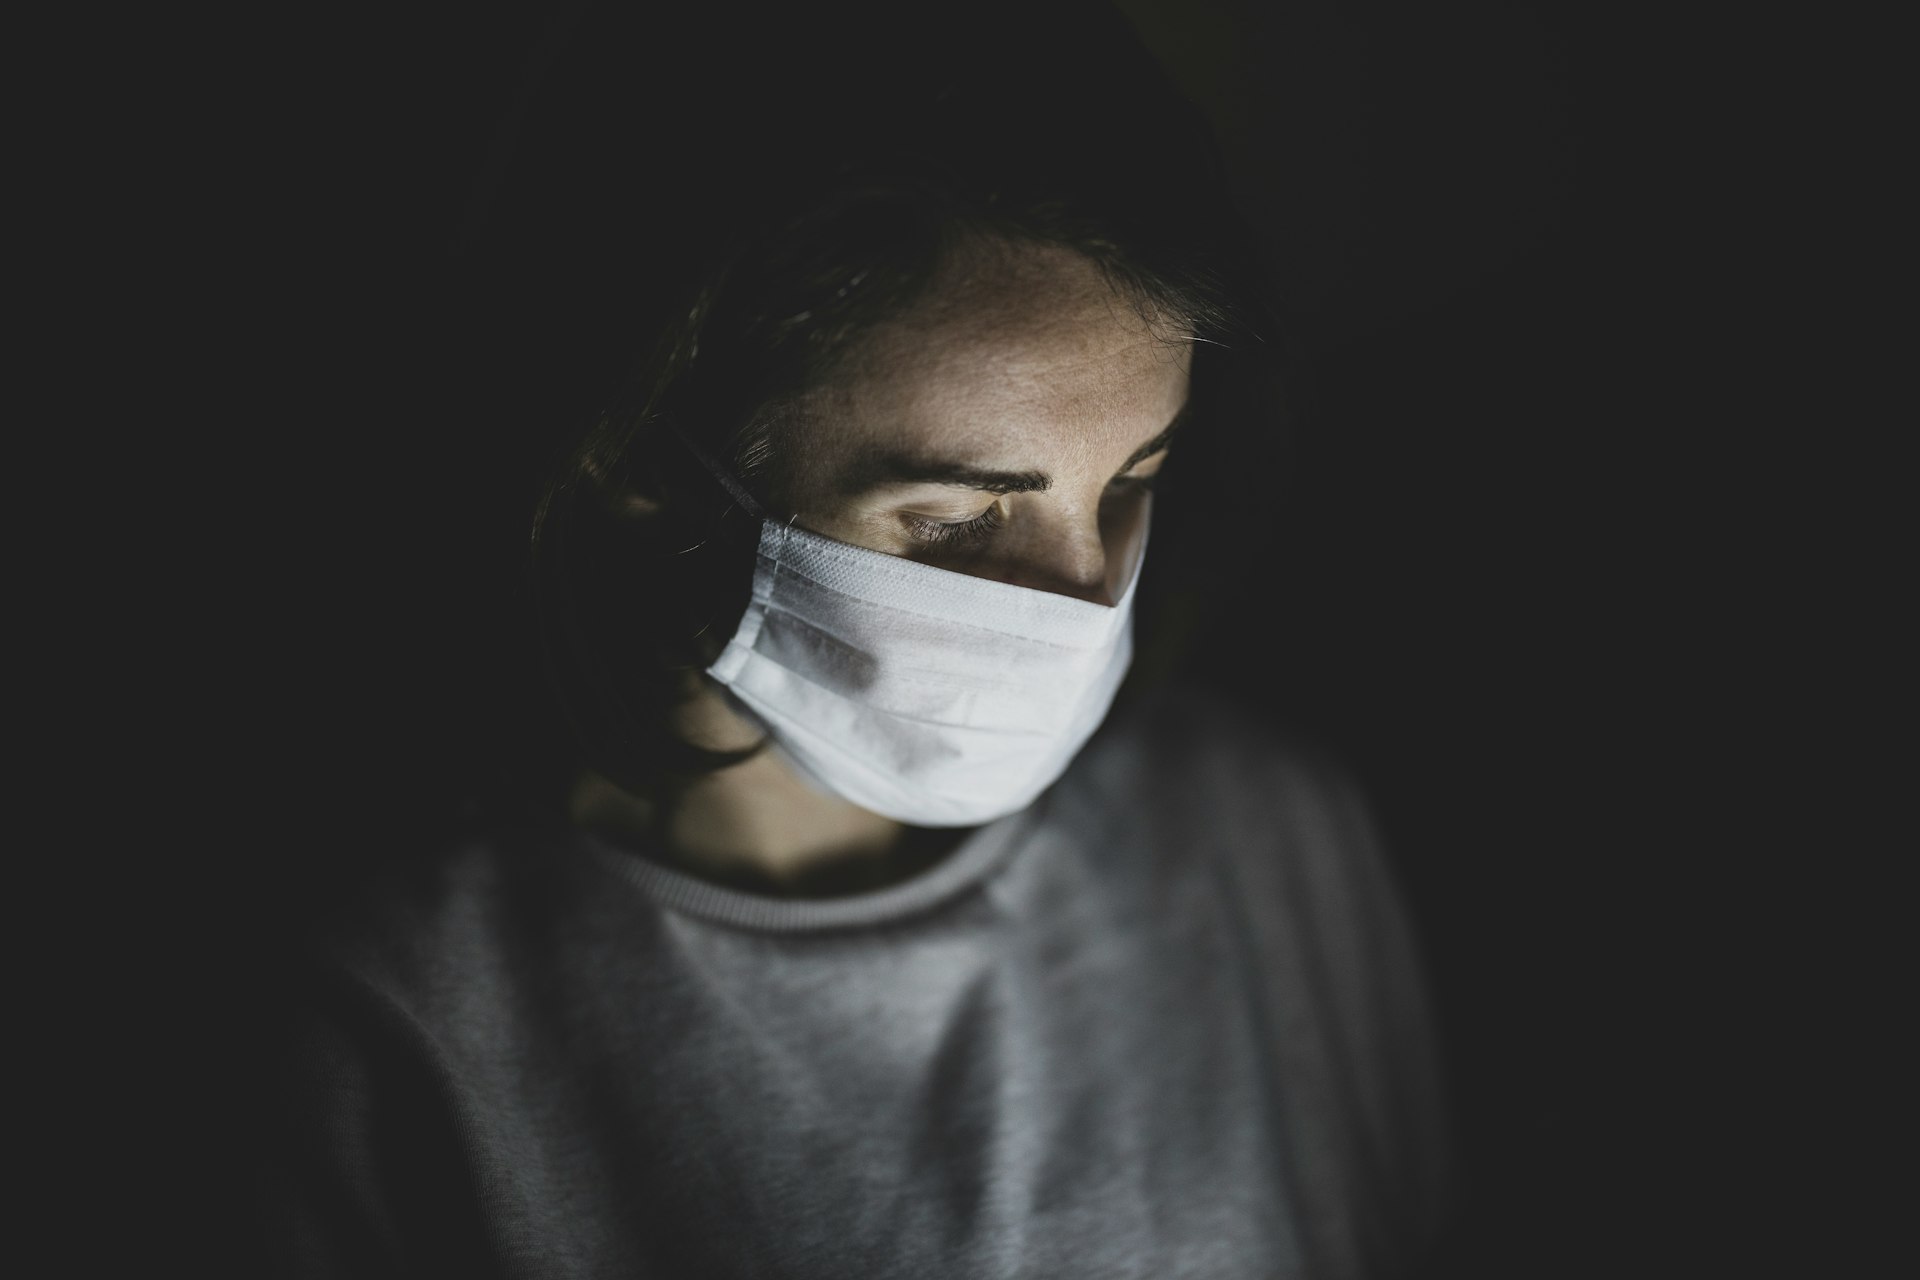 Lessons from the Pandemic for our Youth